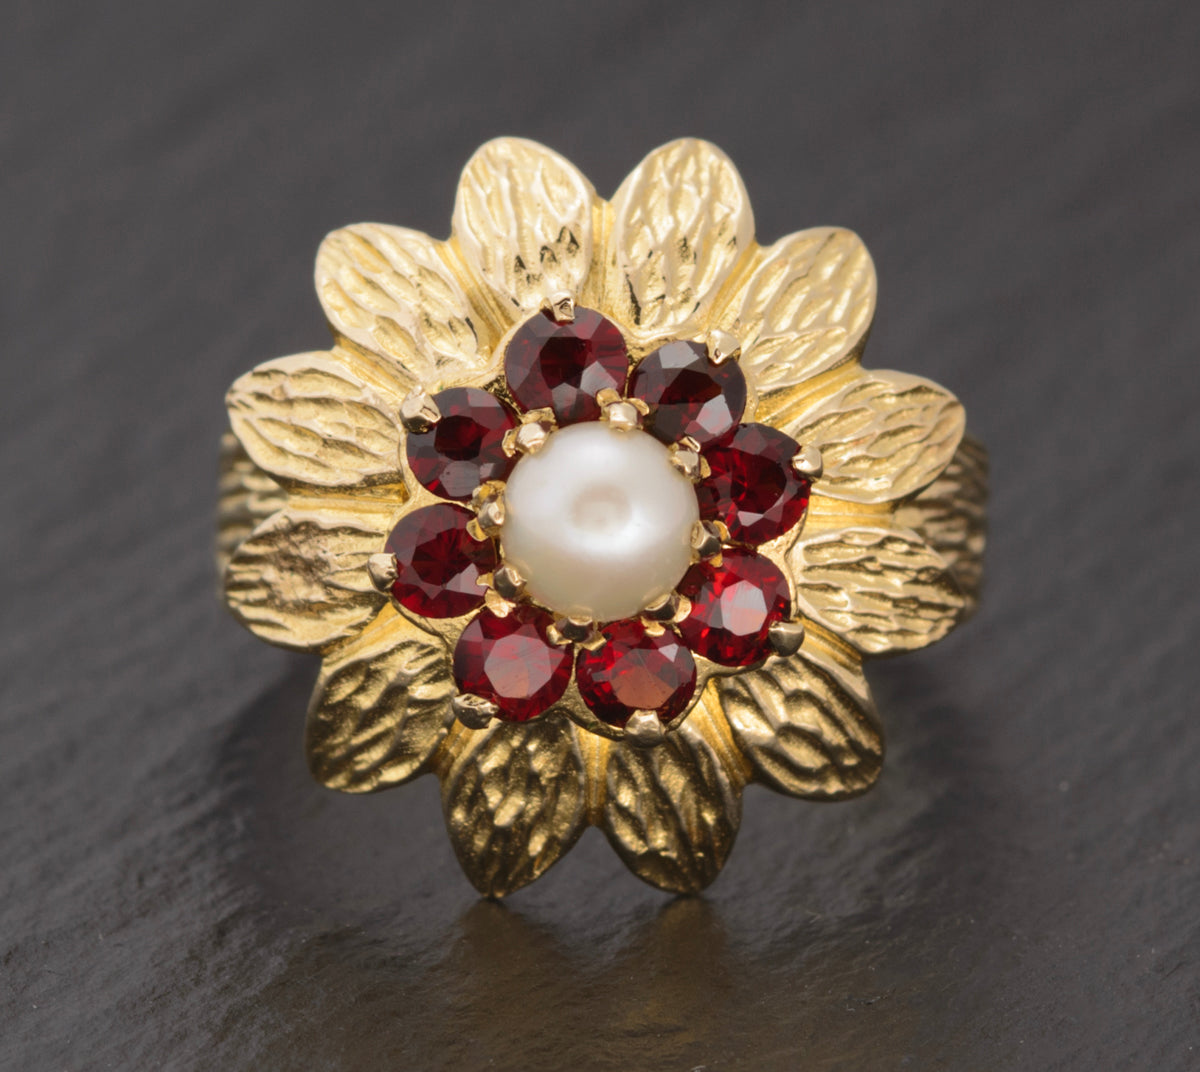 Vintage 9ct Gold Cocktail Ring 1970's Retro With Garnet & Cultured Pearl (A1536)